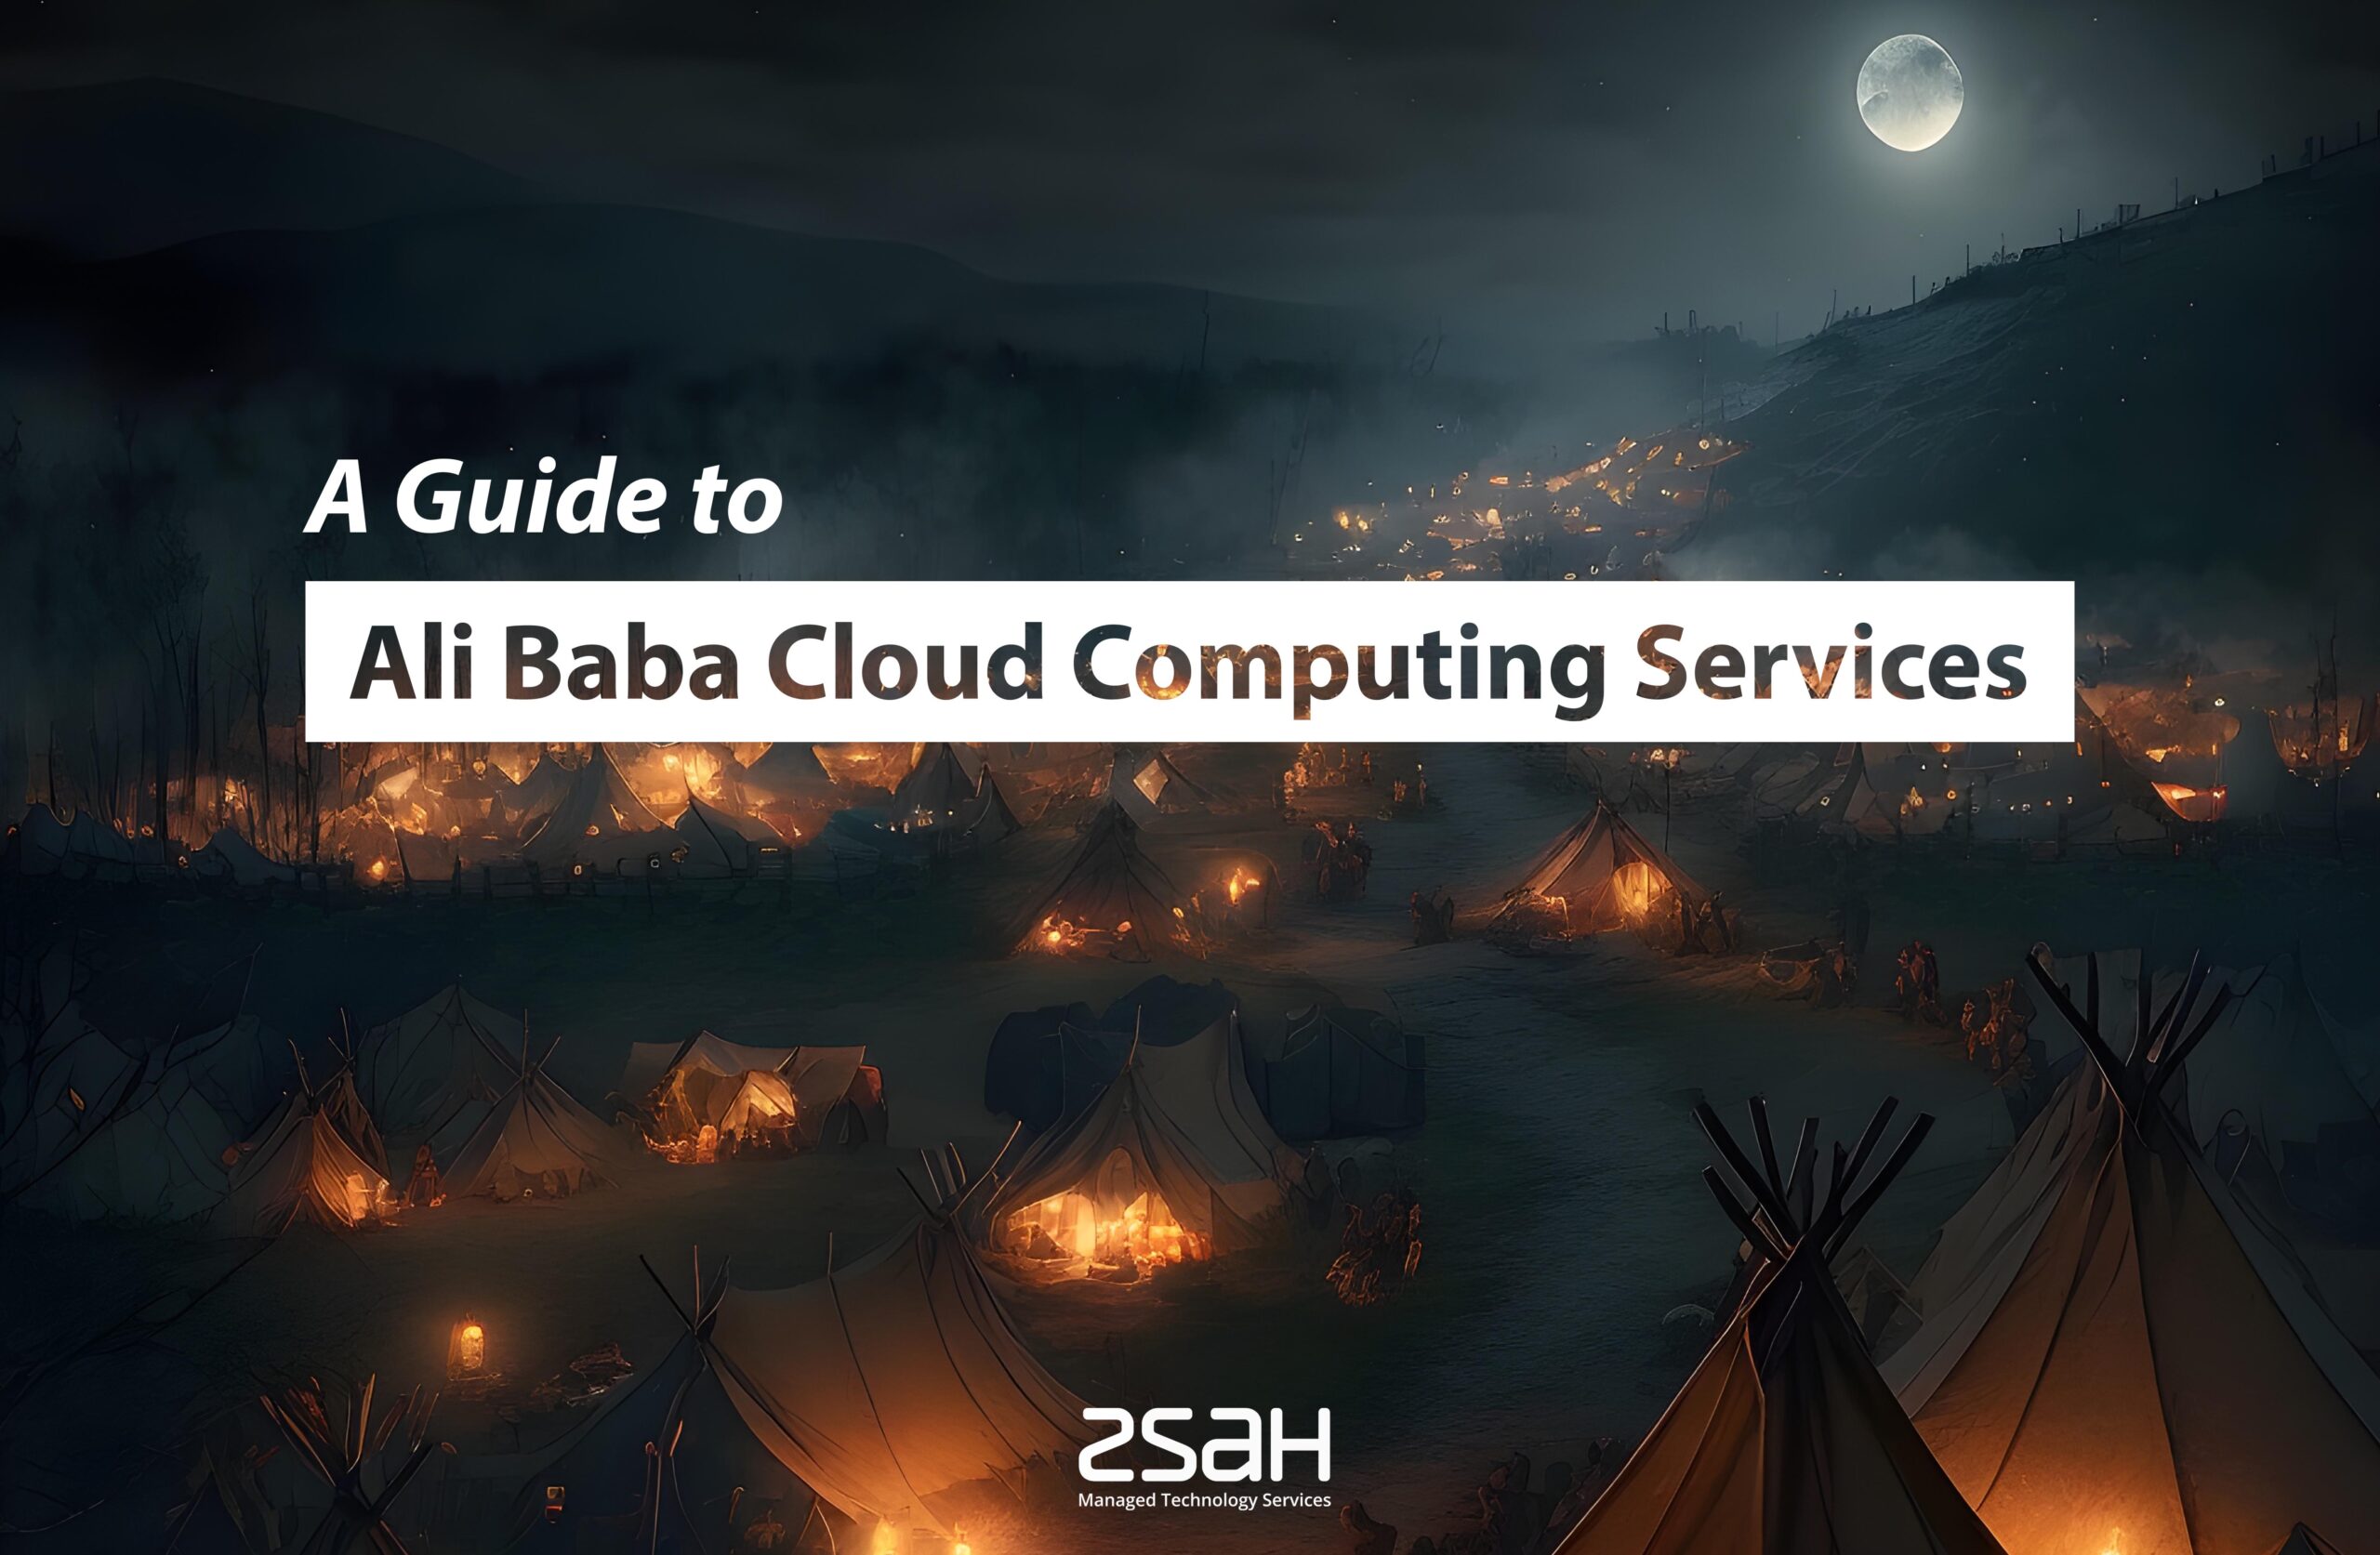 A Guide to AliBaba Cloud Computing Services